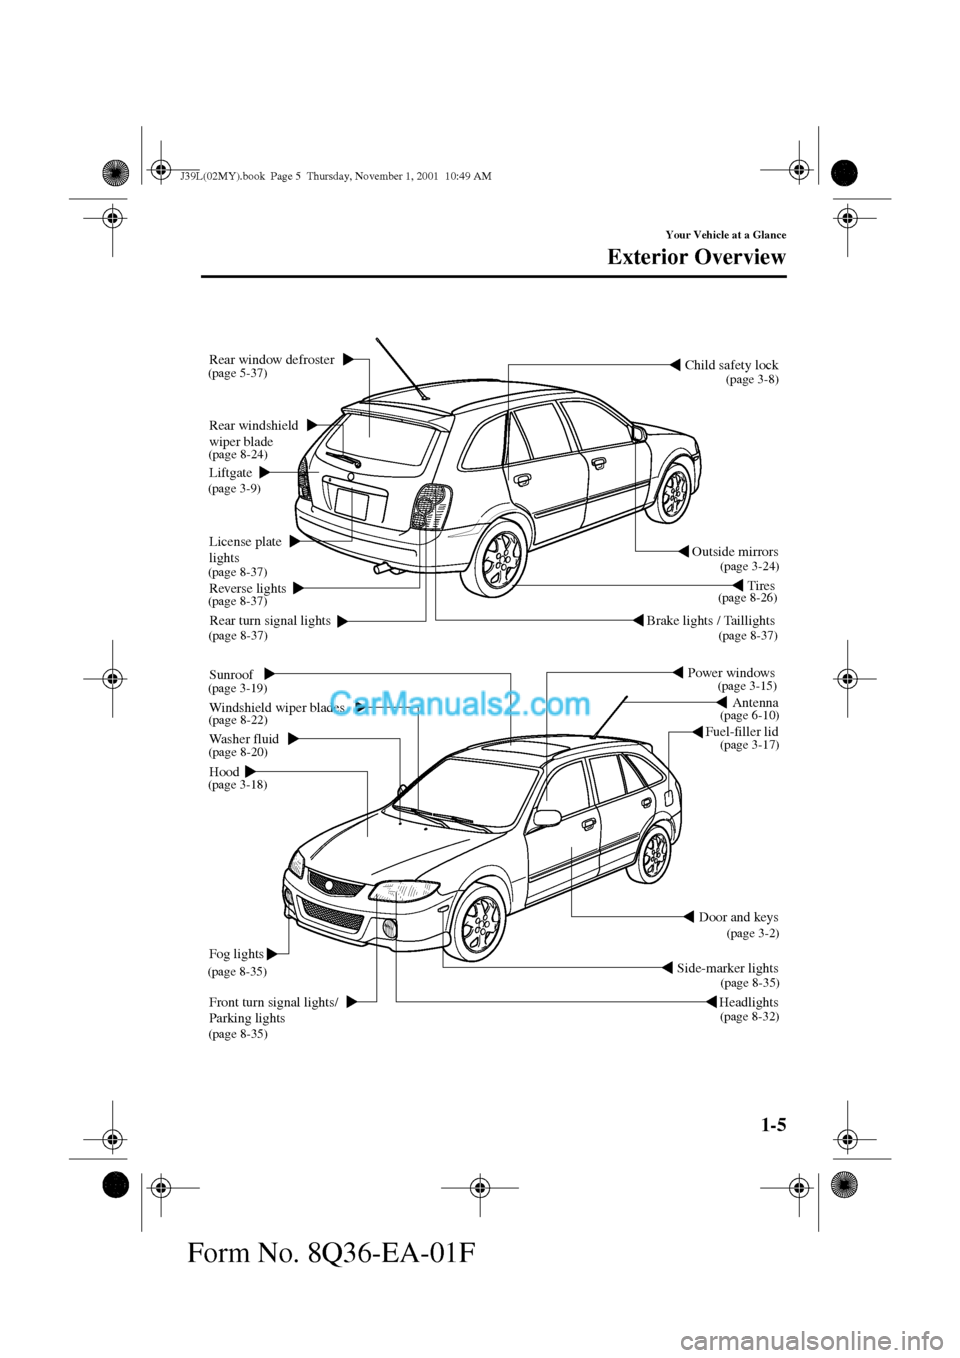 MAZDA MODEL PROTÉGÉ 2002  Owners Manual (in English) 1-5
Your Vehicle at a Glance
Exterior Overview
Form No. 8Q36-EA-01F
Door and keys Outside mirrors
Side-marker lights
Headlights Fuel-filler lid Child safety lock
Tires 
Reverse lights
Windshield wiper